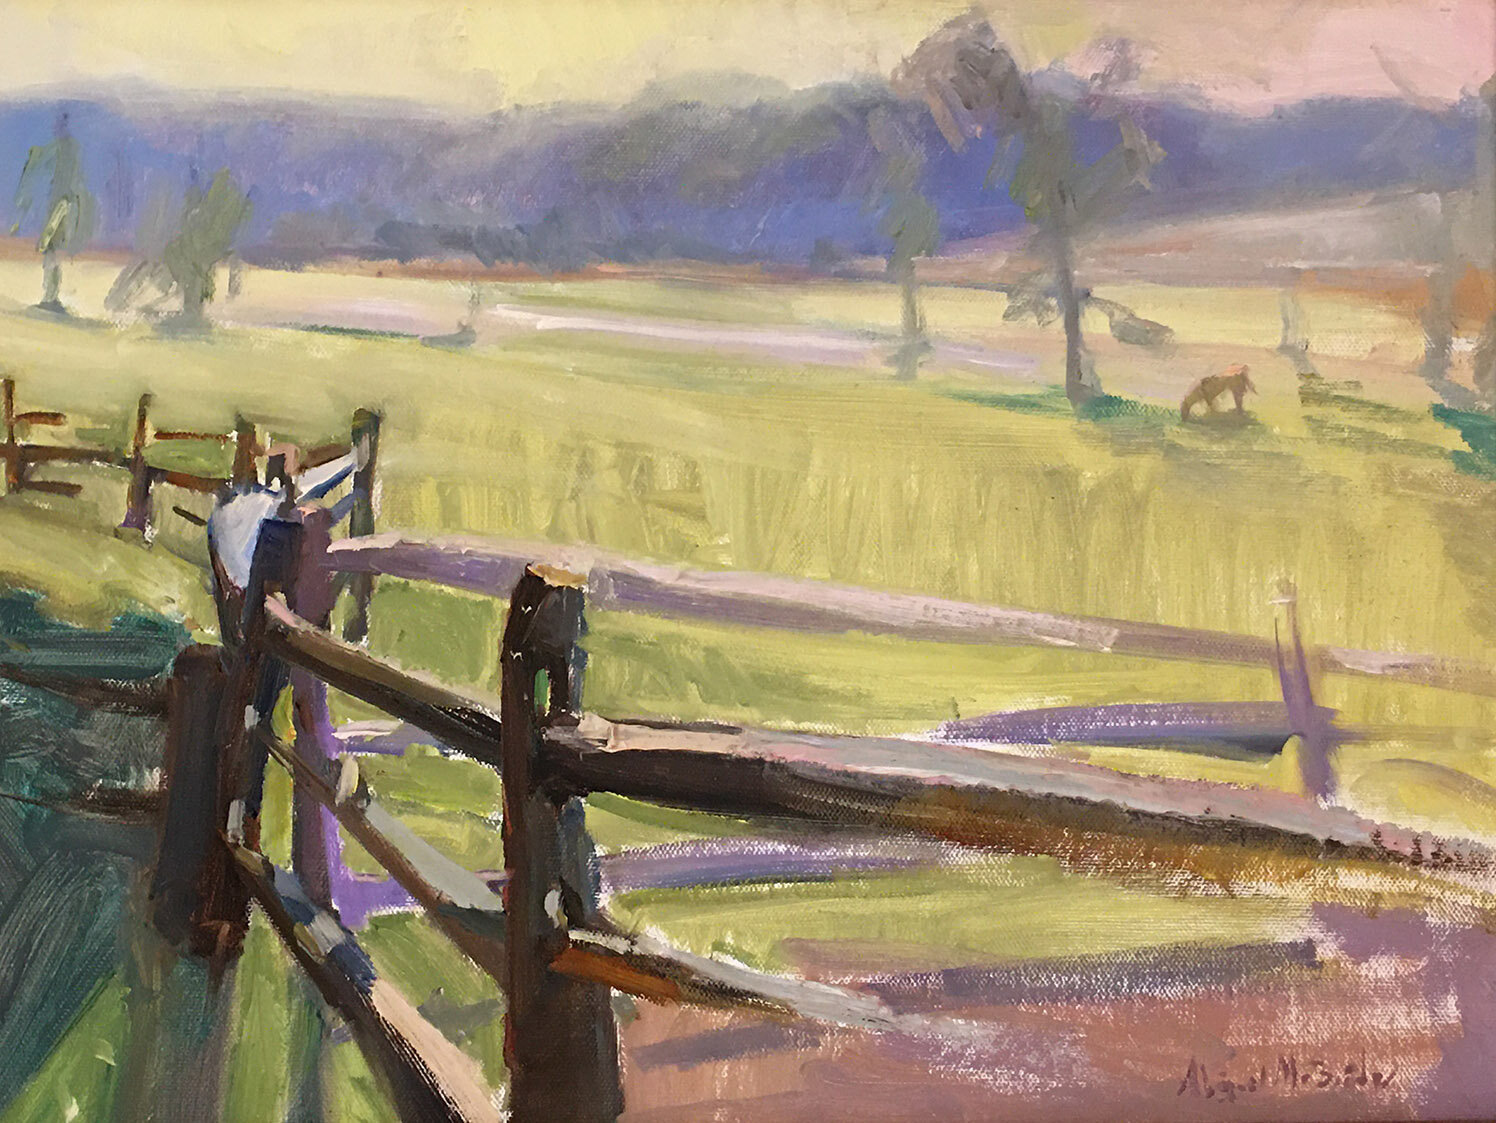 From the outdoors to interesting people, the subjects of artist Abigail McBride are broad in scope. Her work will be on exhibit until September 5 at McBride Gallery in Annapolis.